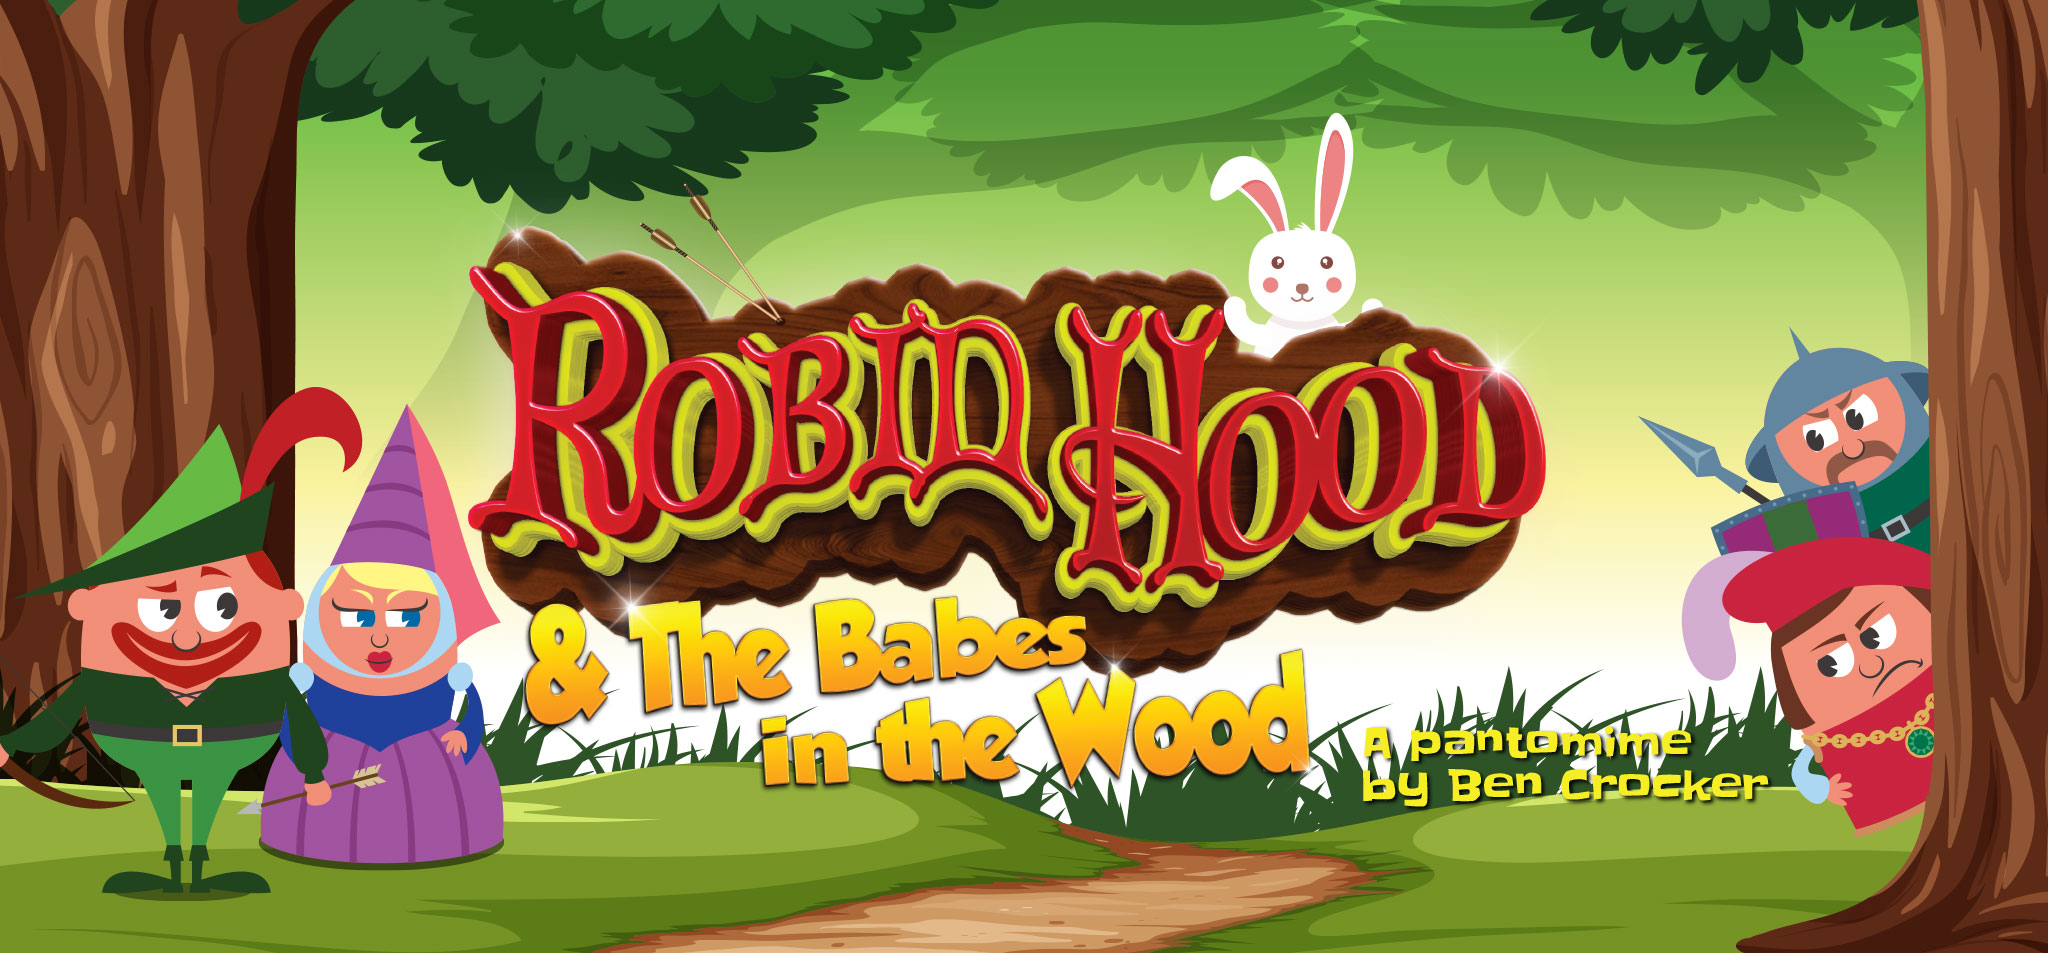 Robin Hood and Babes in the Wood